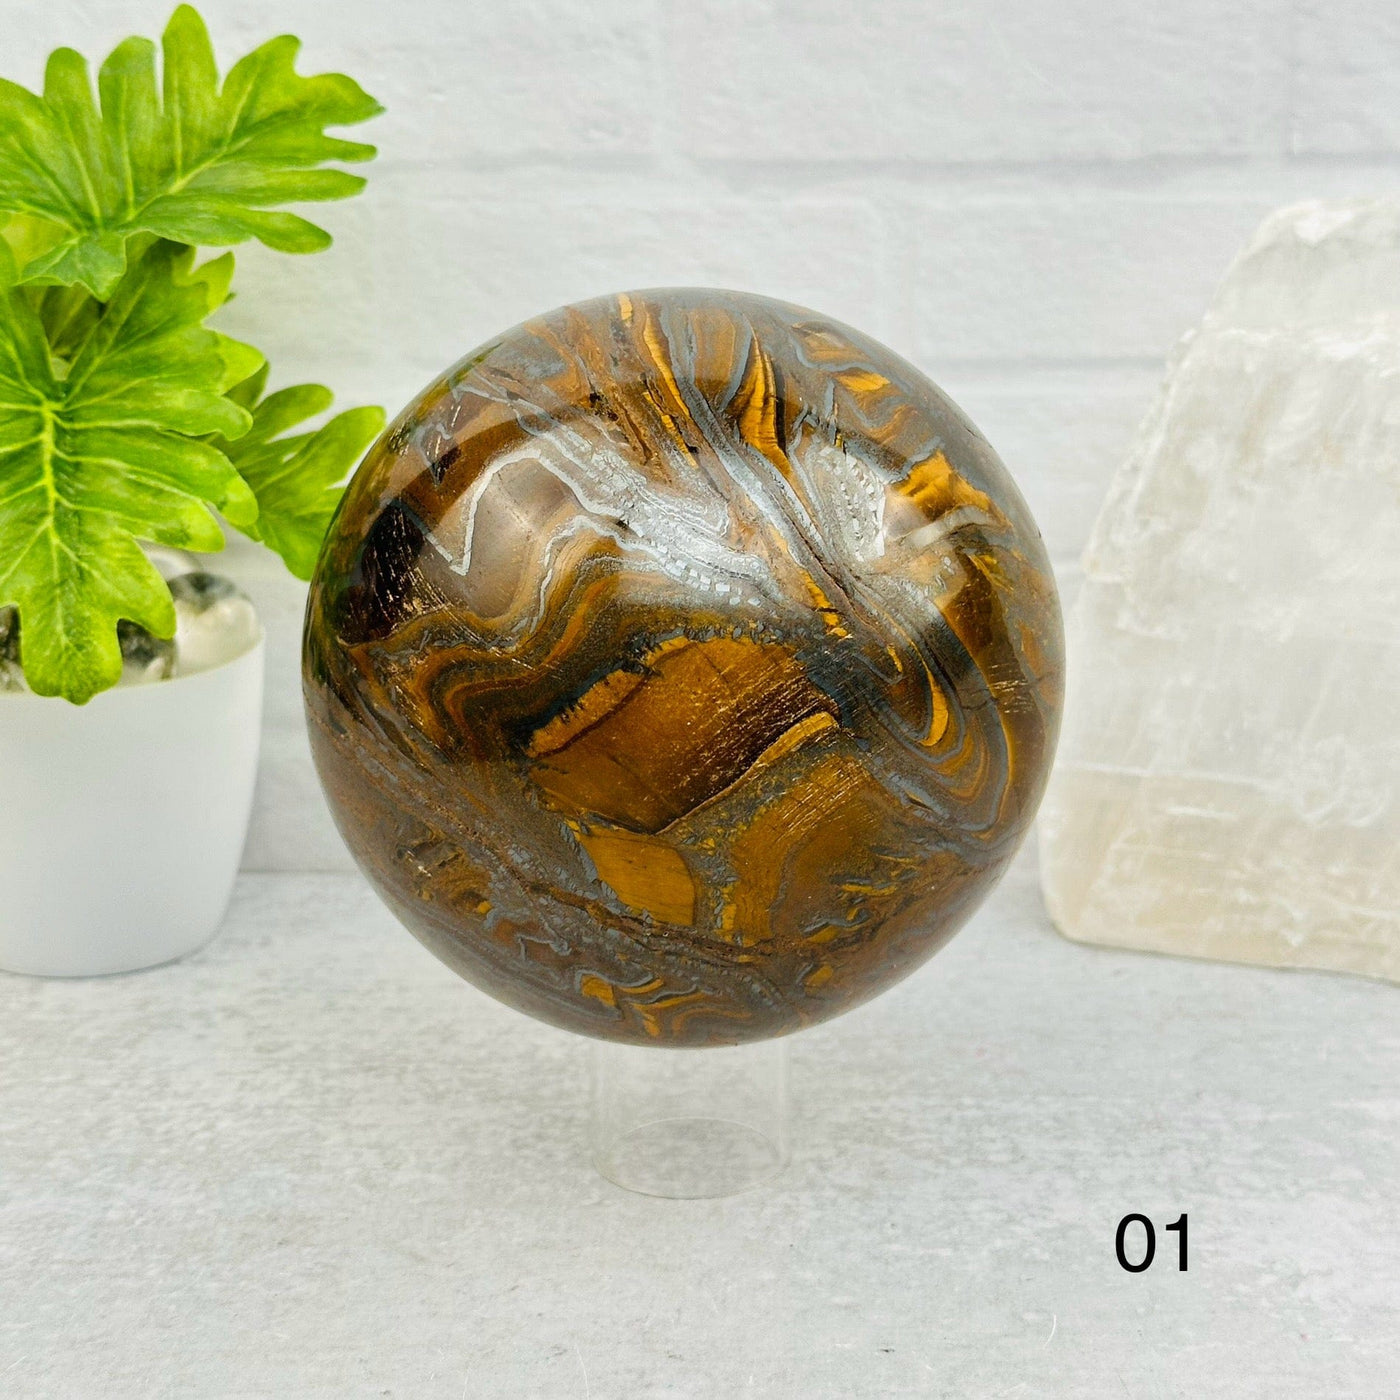 Tigers Eye with Hematite Polished Spheres - You Choose - option 01 displayed s home decor 